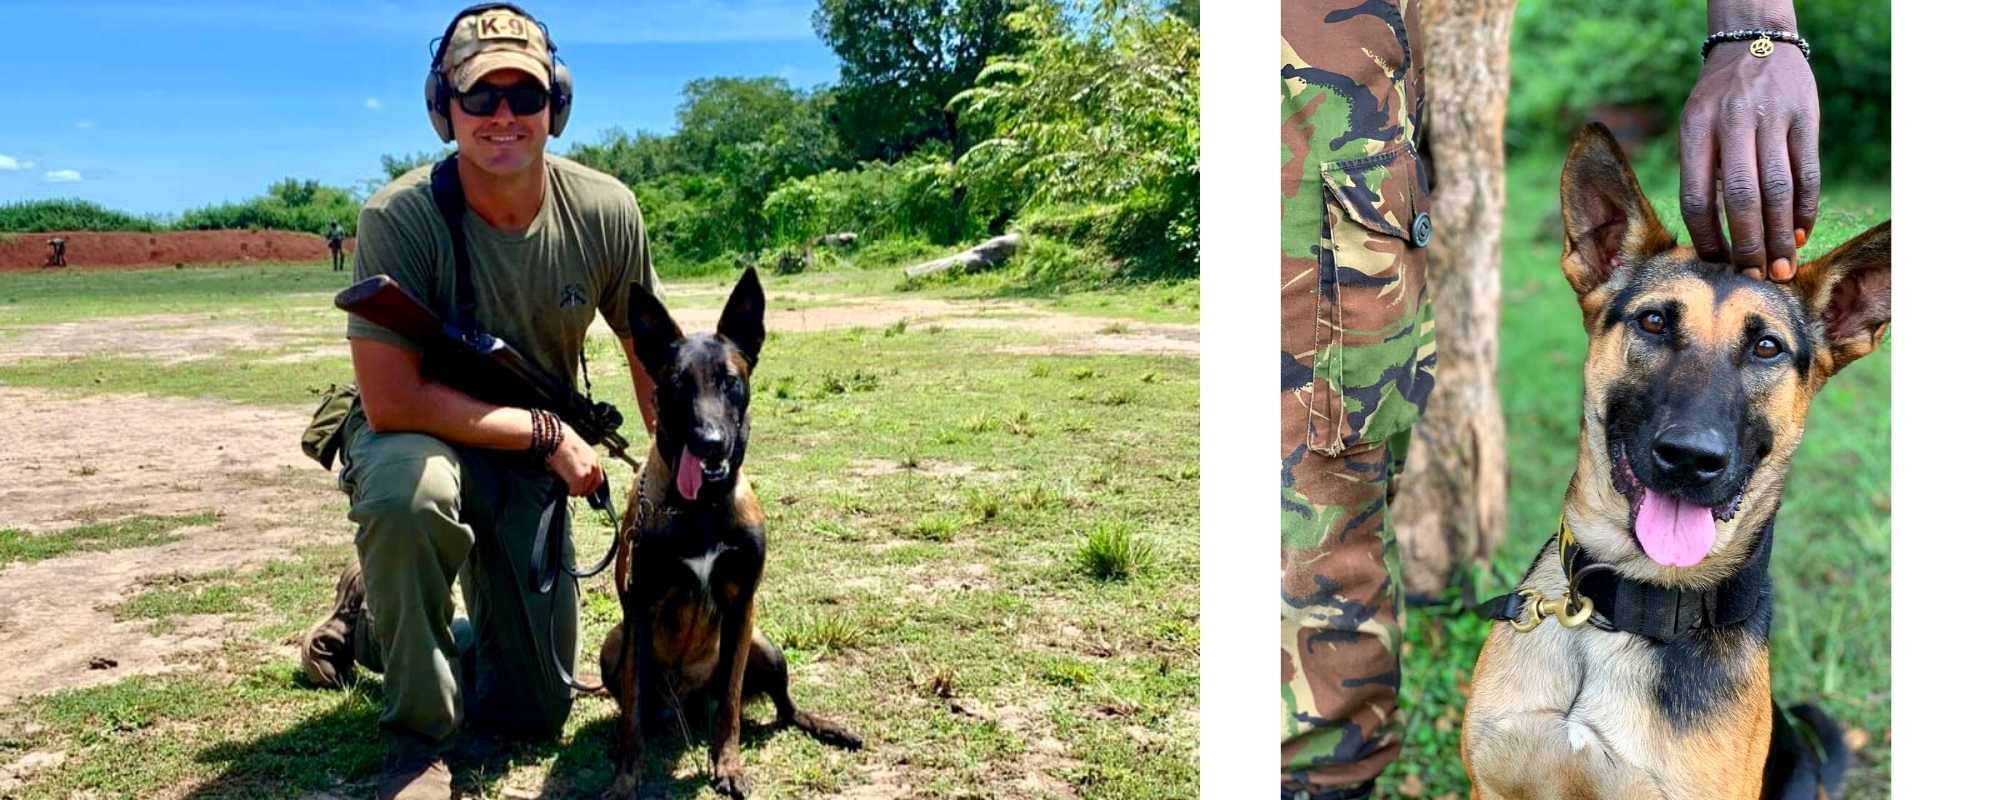 Training Dogs for Anti-Poaching in Africa - Wild In Africa®